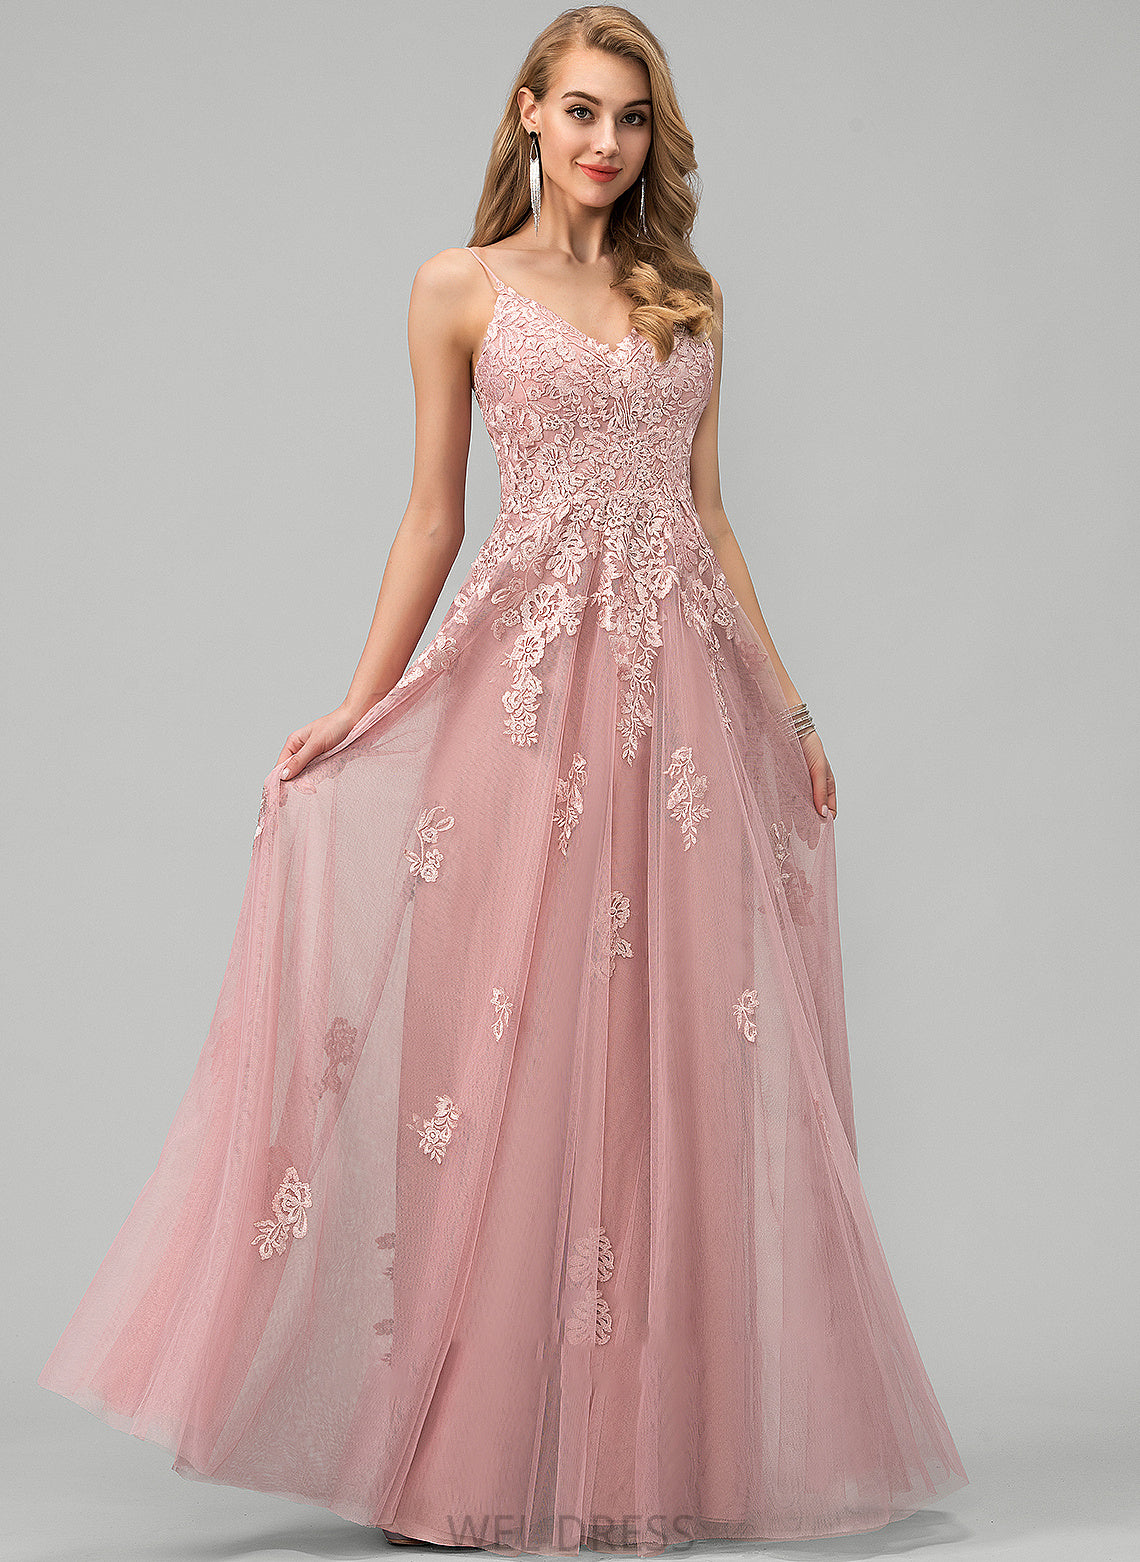 Melanie Tulle Prom Dresses Lace V-neck Floor-Length With Ball-Gown/Princess